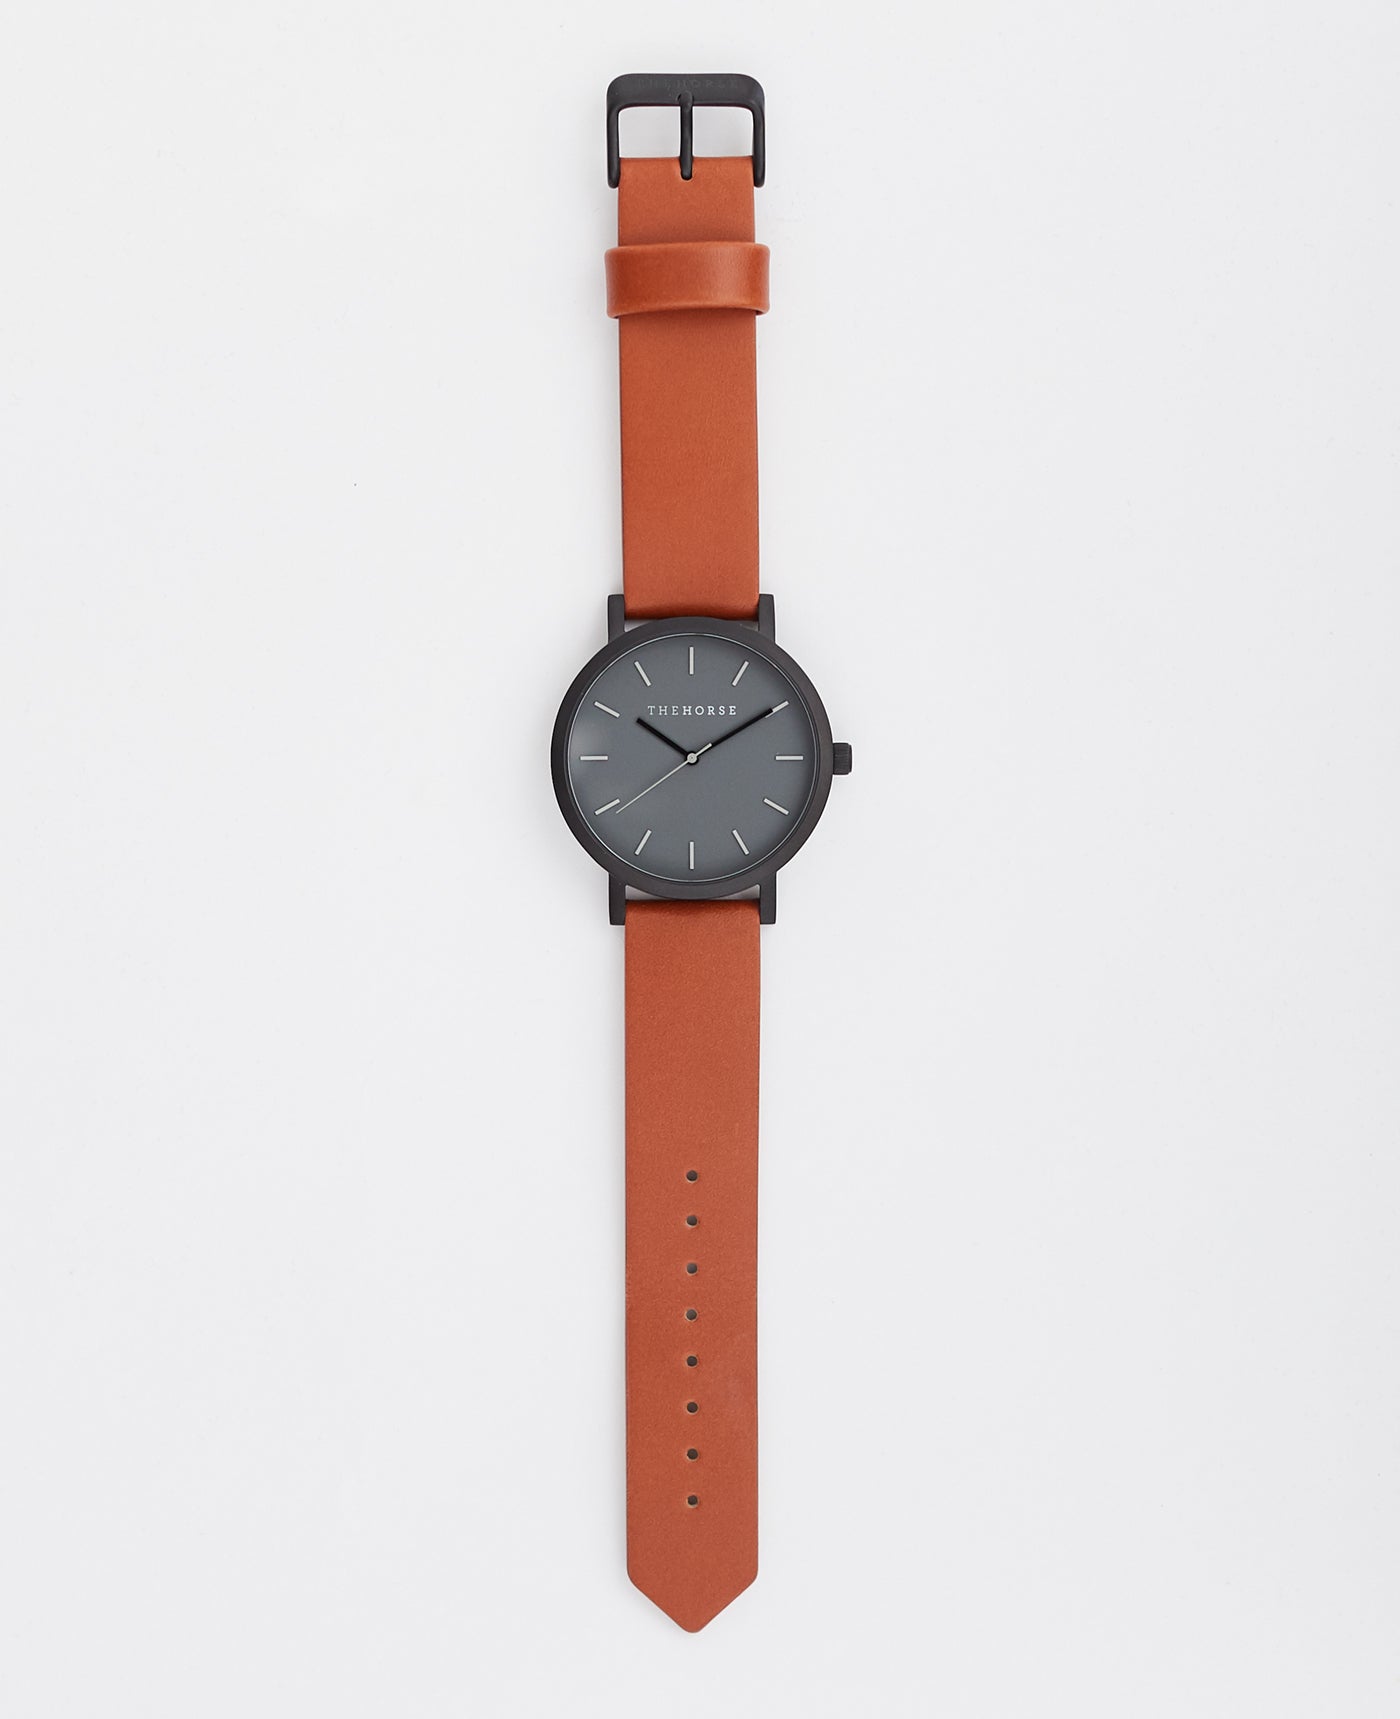 The Original Watch Matte Black / Tan Leather Strap by The Horse